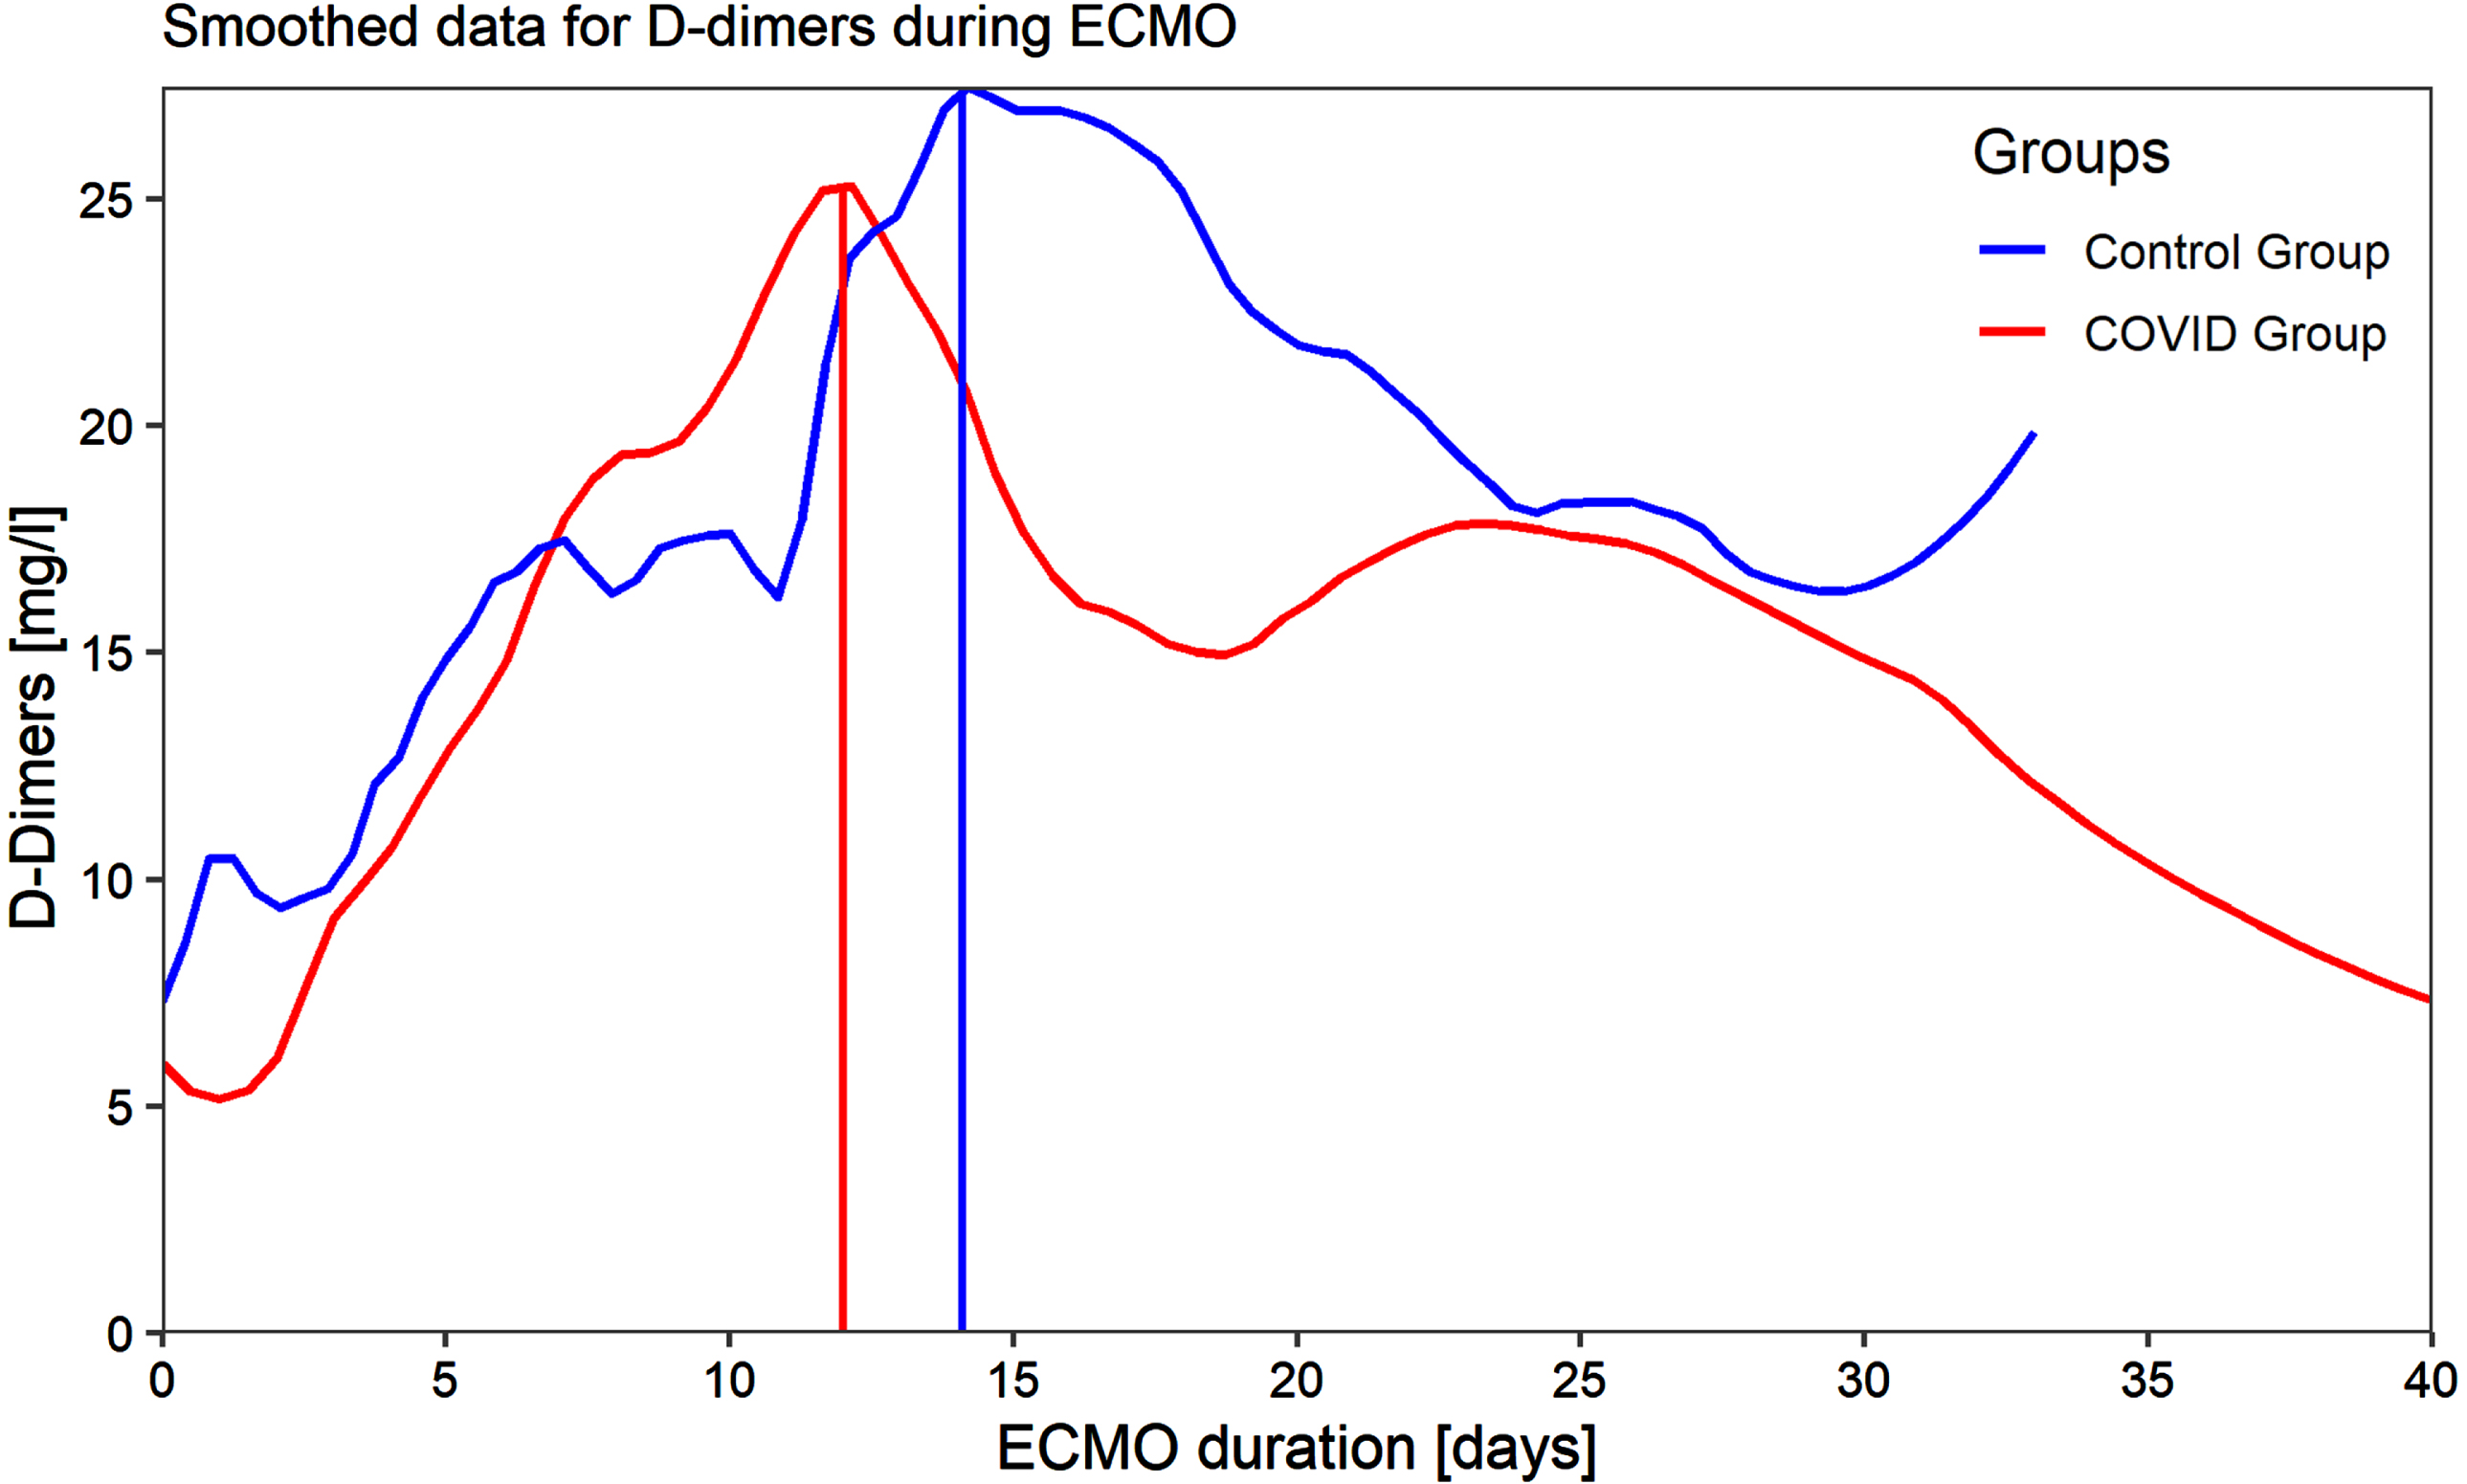 D-Dimer levels over time for both groups with their respective peaks at 12 and 14 days of ECMO support.